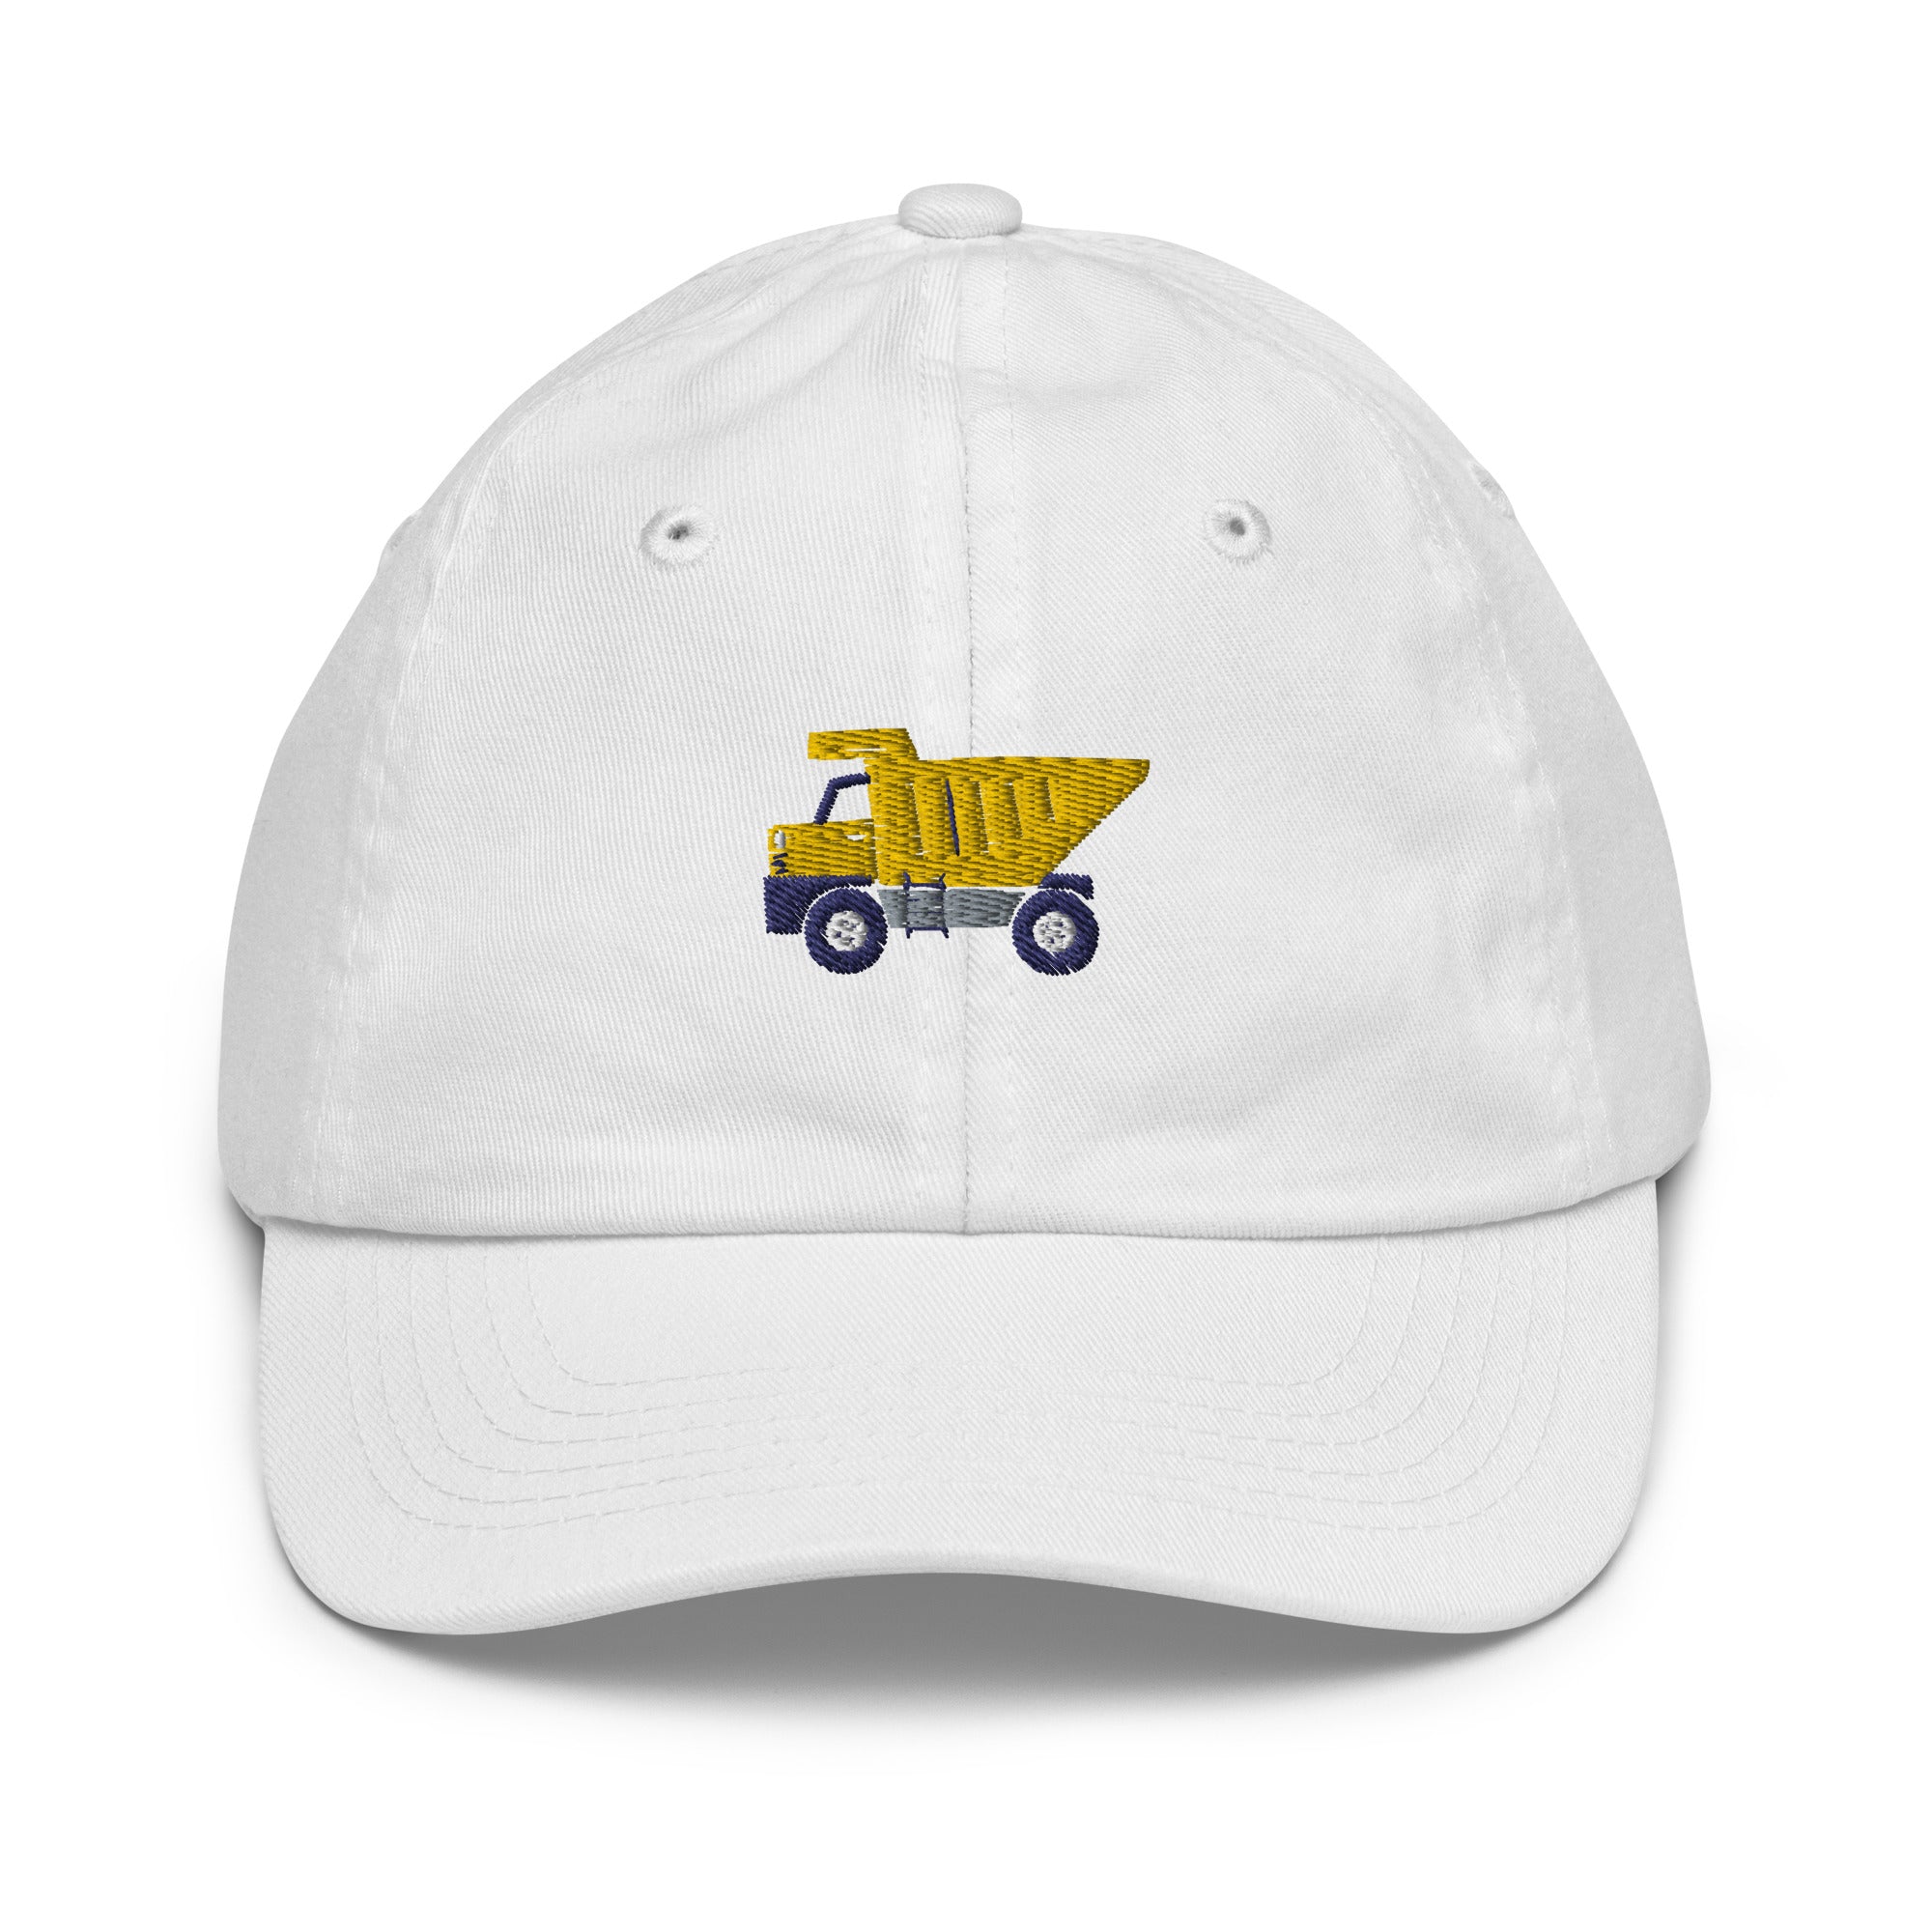 Kid's hat with a truck